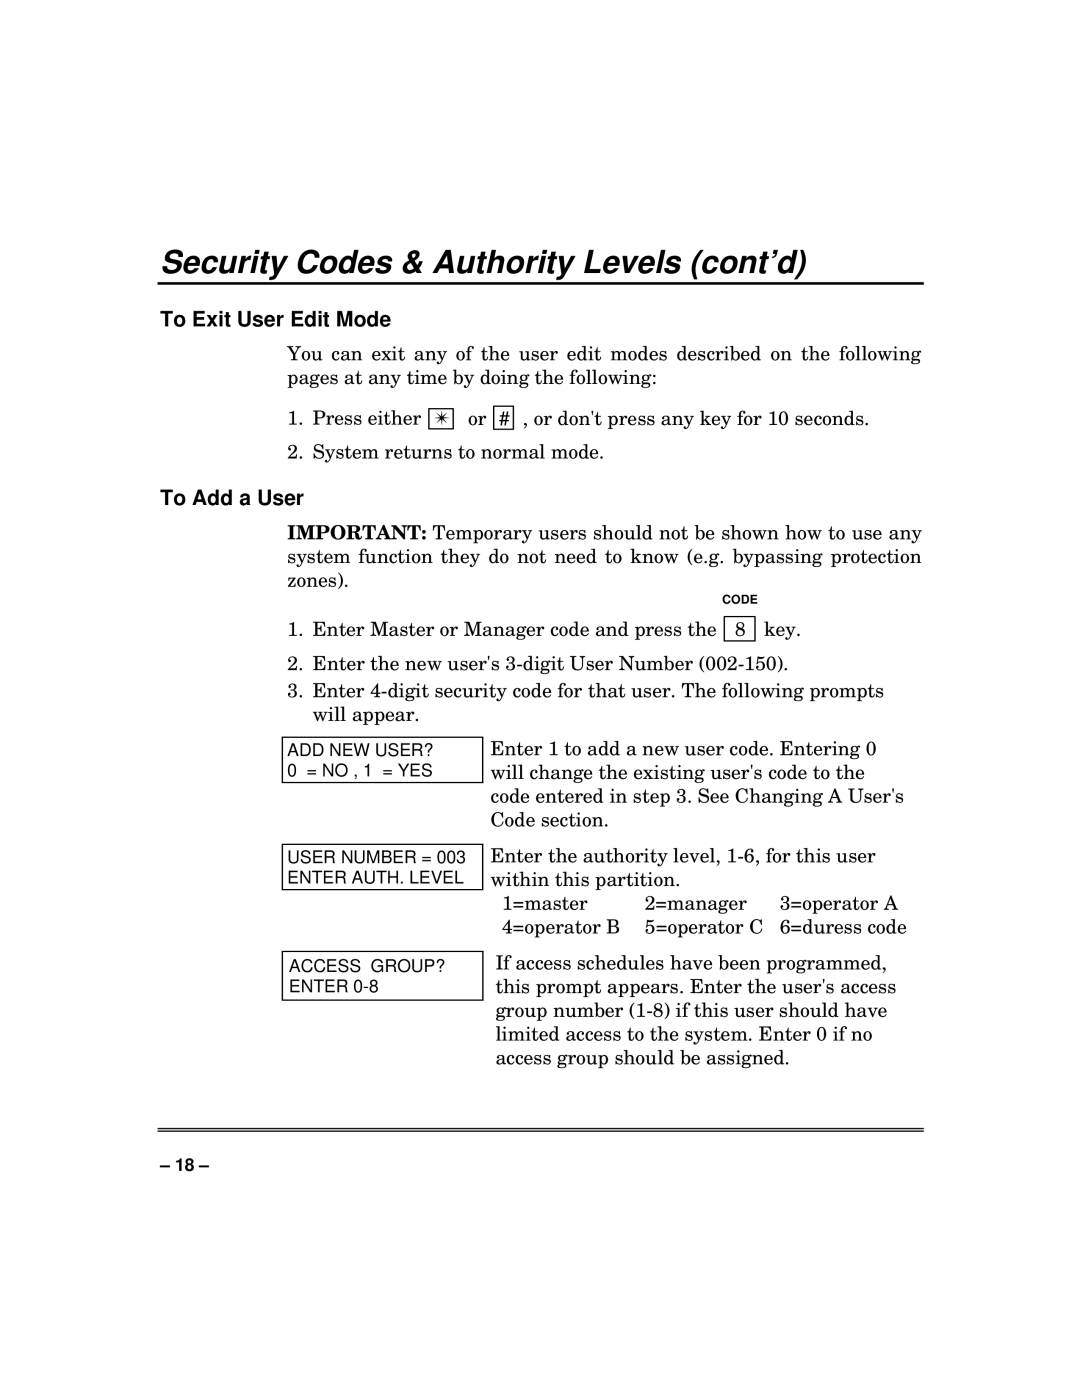 First Alert fire and burglary partitioned security systems with scheduleing manual To Exit User Edit Mode, To Add a User 